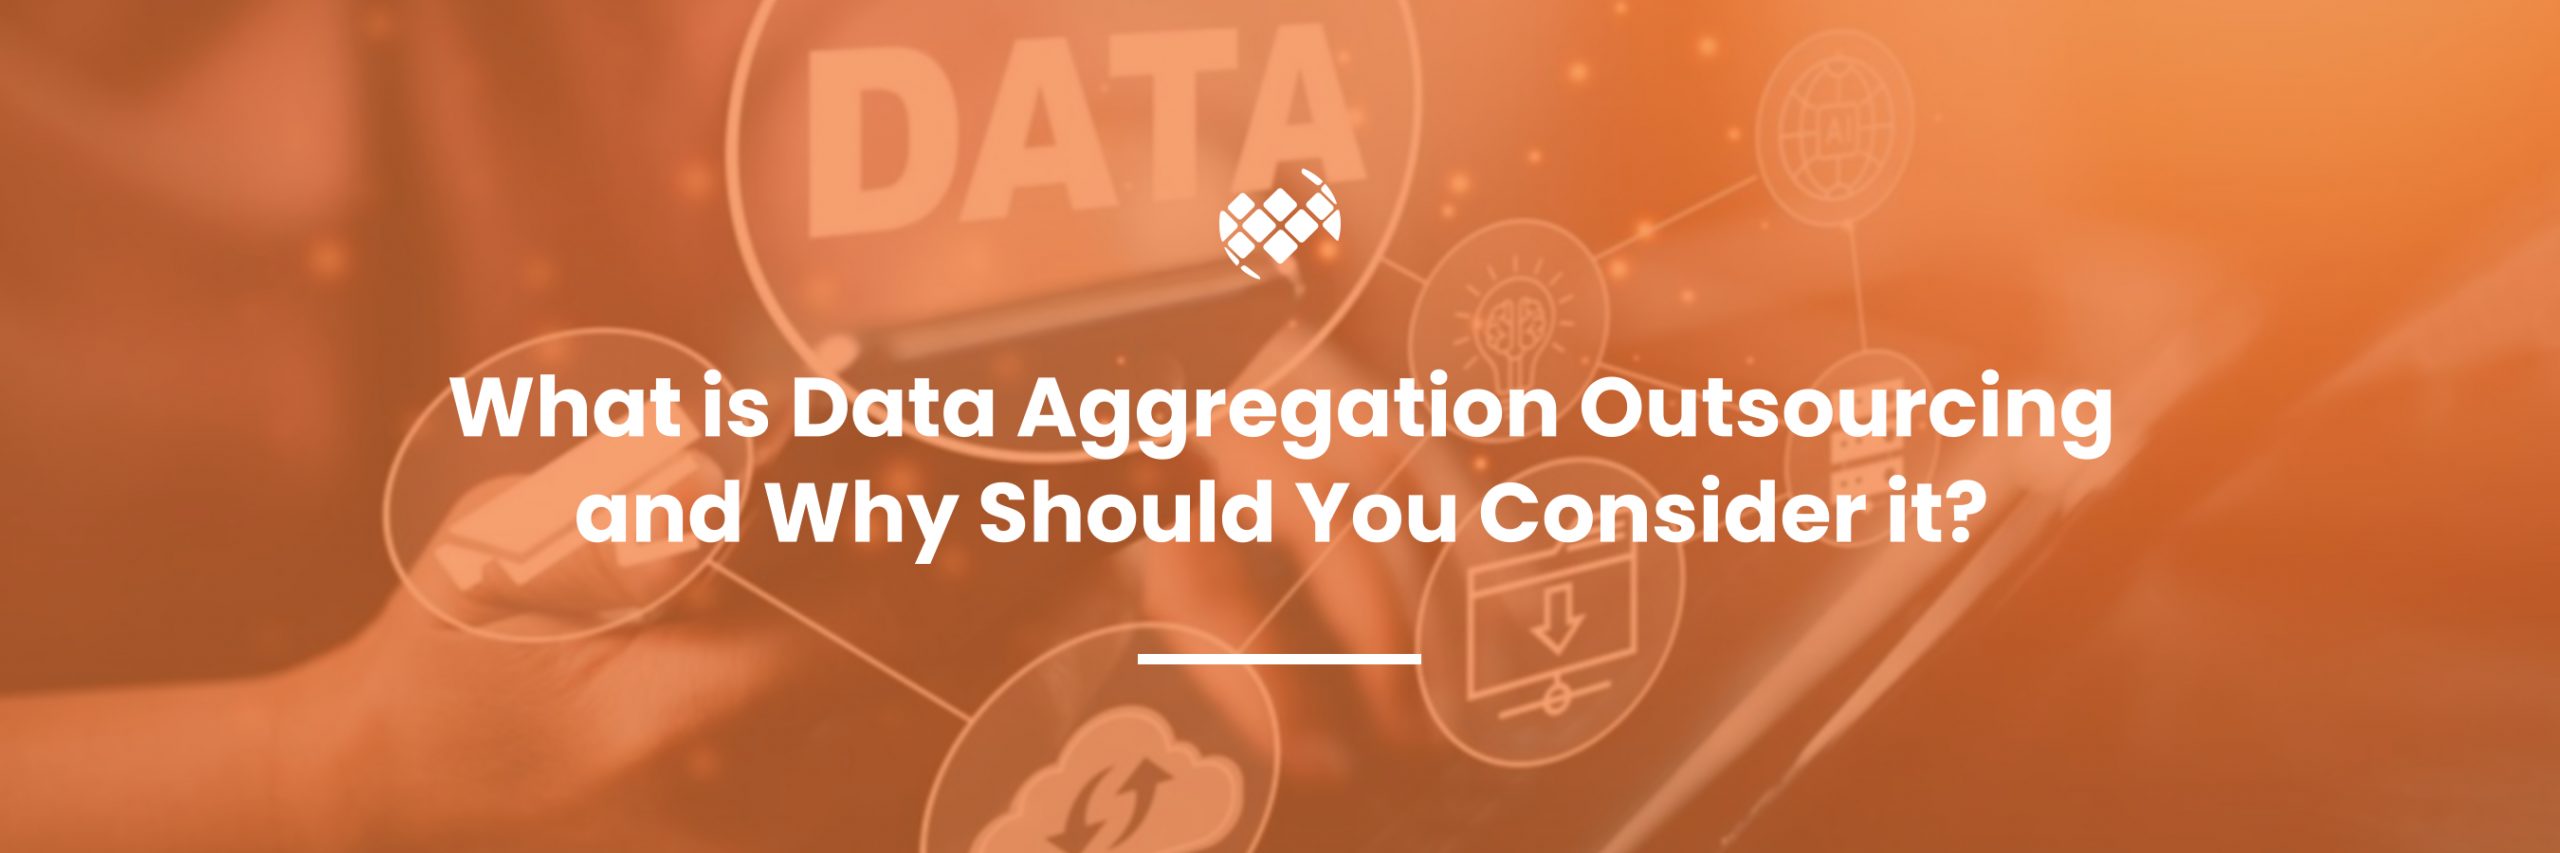 Data Aggregation Outsourcing